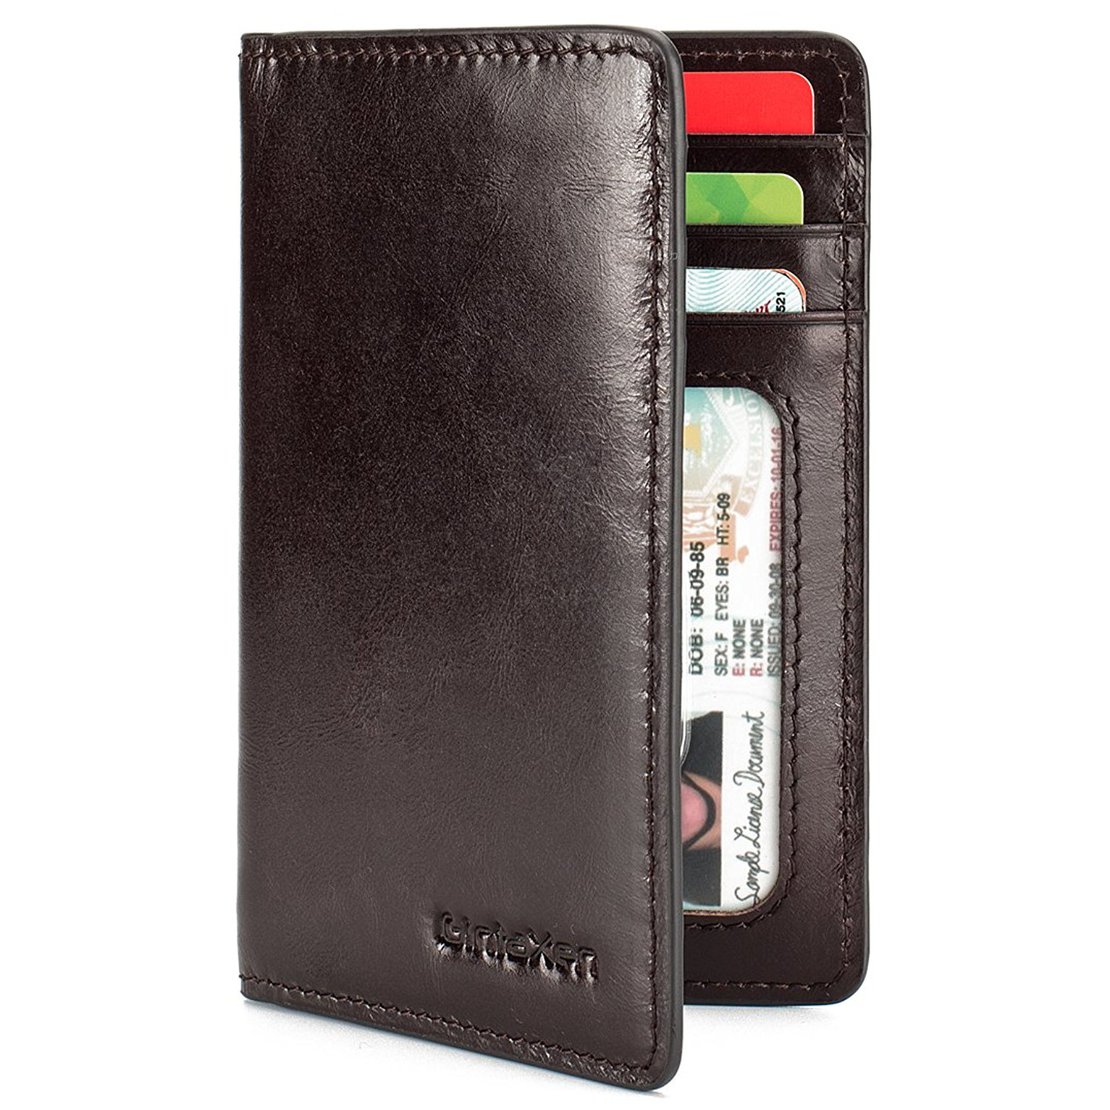 A review of the GintaXen Bifold Card Holder | LeatherWallets.org